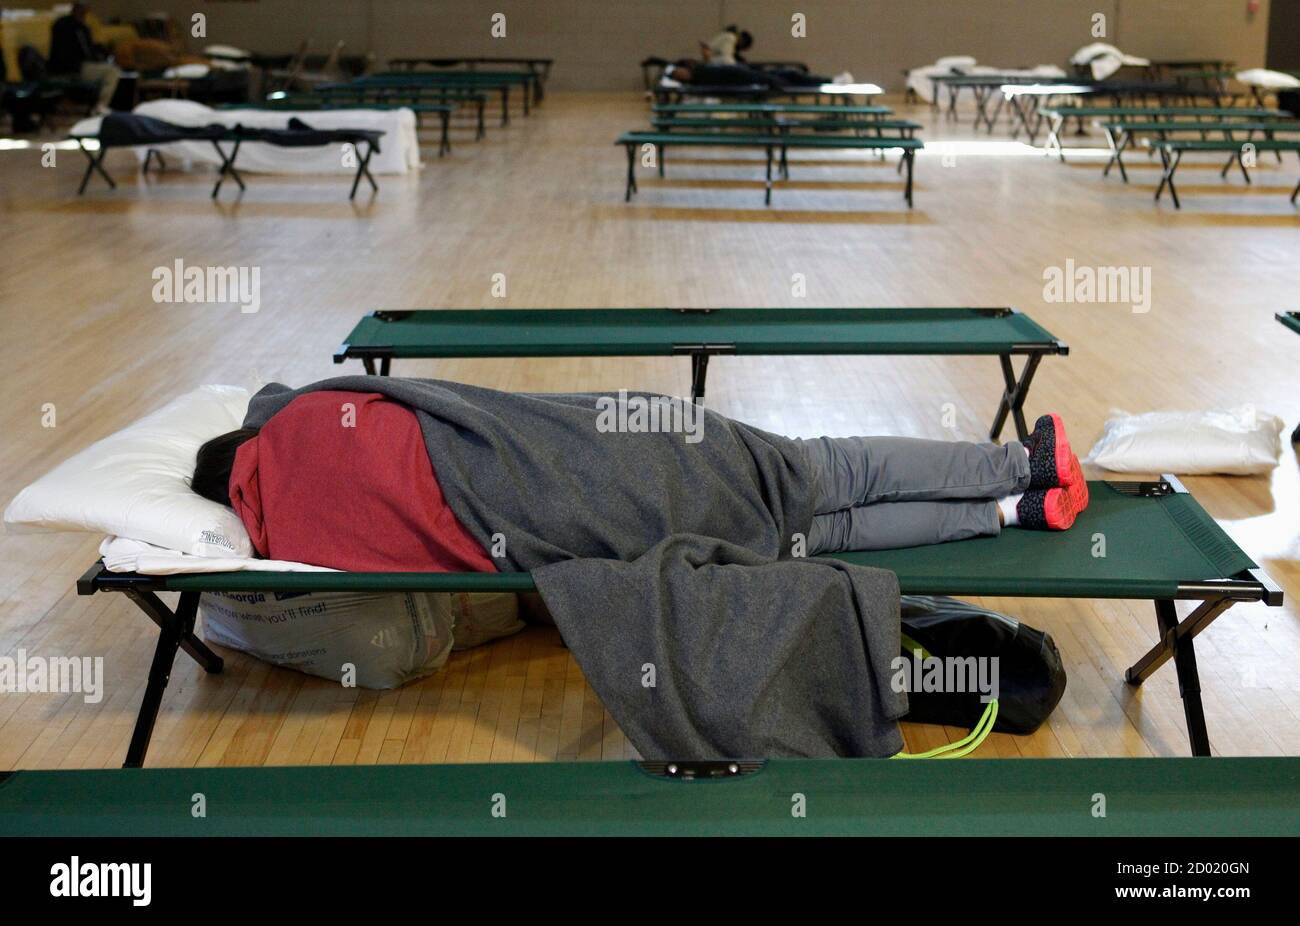 A man lies on a cot at a warming center as the temperature fell into the single digits in Atlanta, Georgia January 8, 2015.  Temperatures plummeted to an uncharacteristic 10 to 15 degrees overnight across the Gulf Coast, where a hard freeze warning was issued for east Texas across parts of Louisiana, Mississippi and southern Georgia, NWS said. REUTERS/Tami Chappell  (UNITED STATES - Tags: ENVIRONMENT SOCIETY) Stock Photo